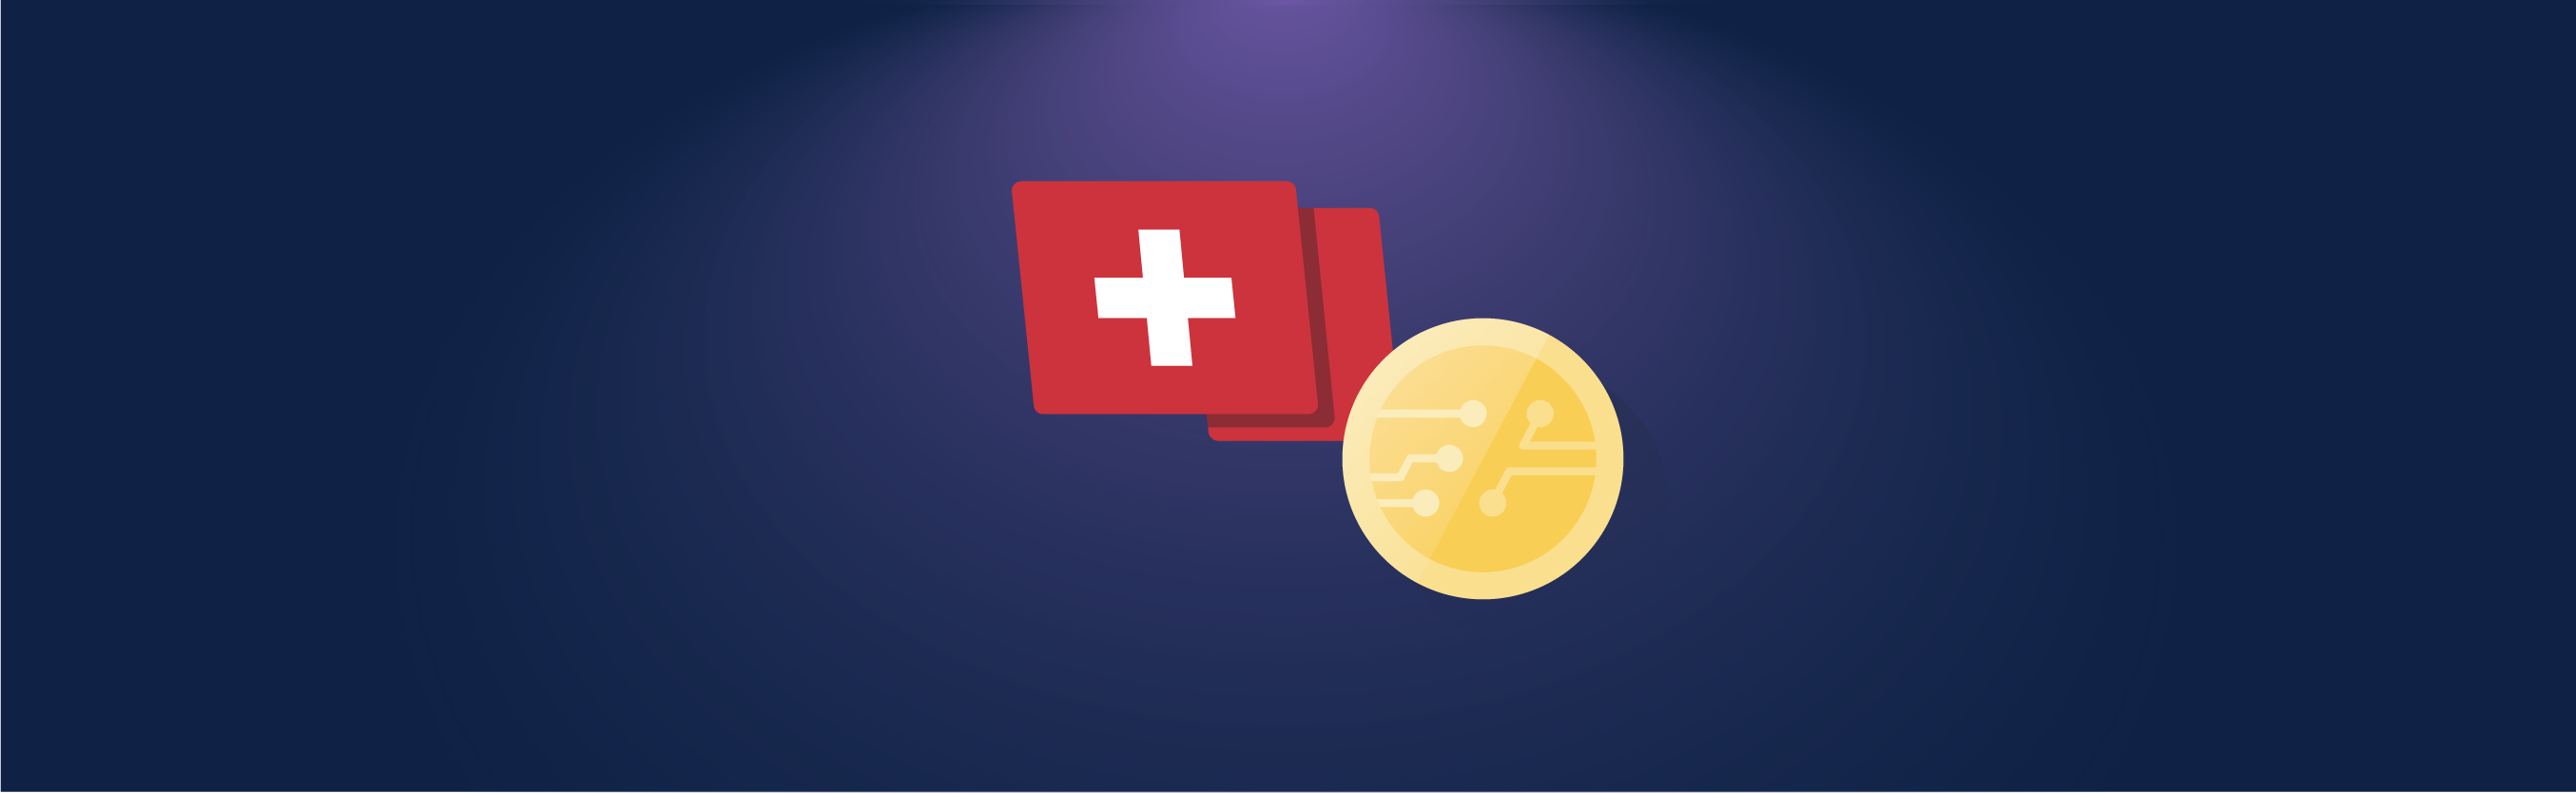 How are crypto-assets regulated and safeguarded? The focus is on Switzerland